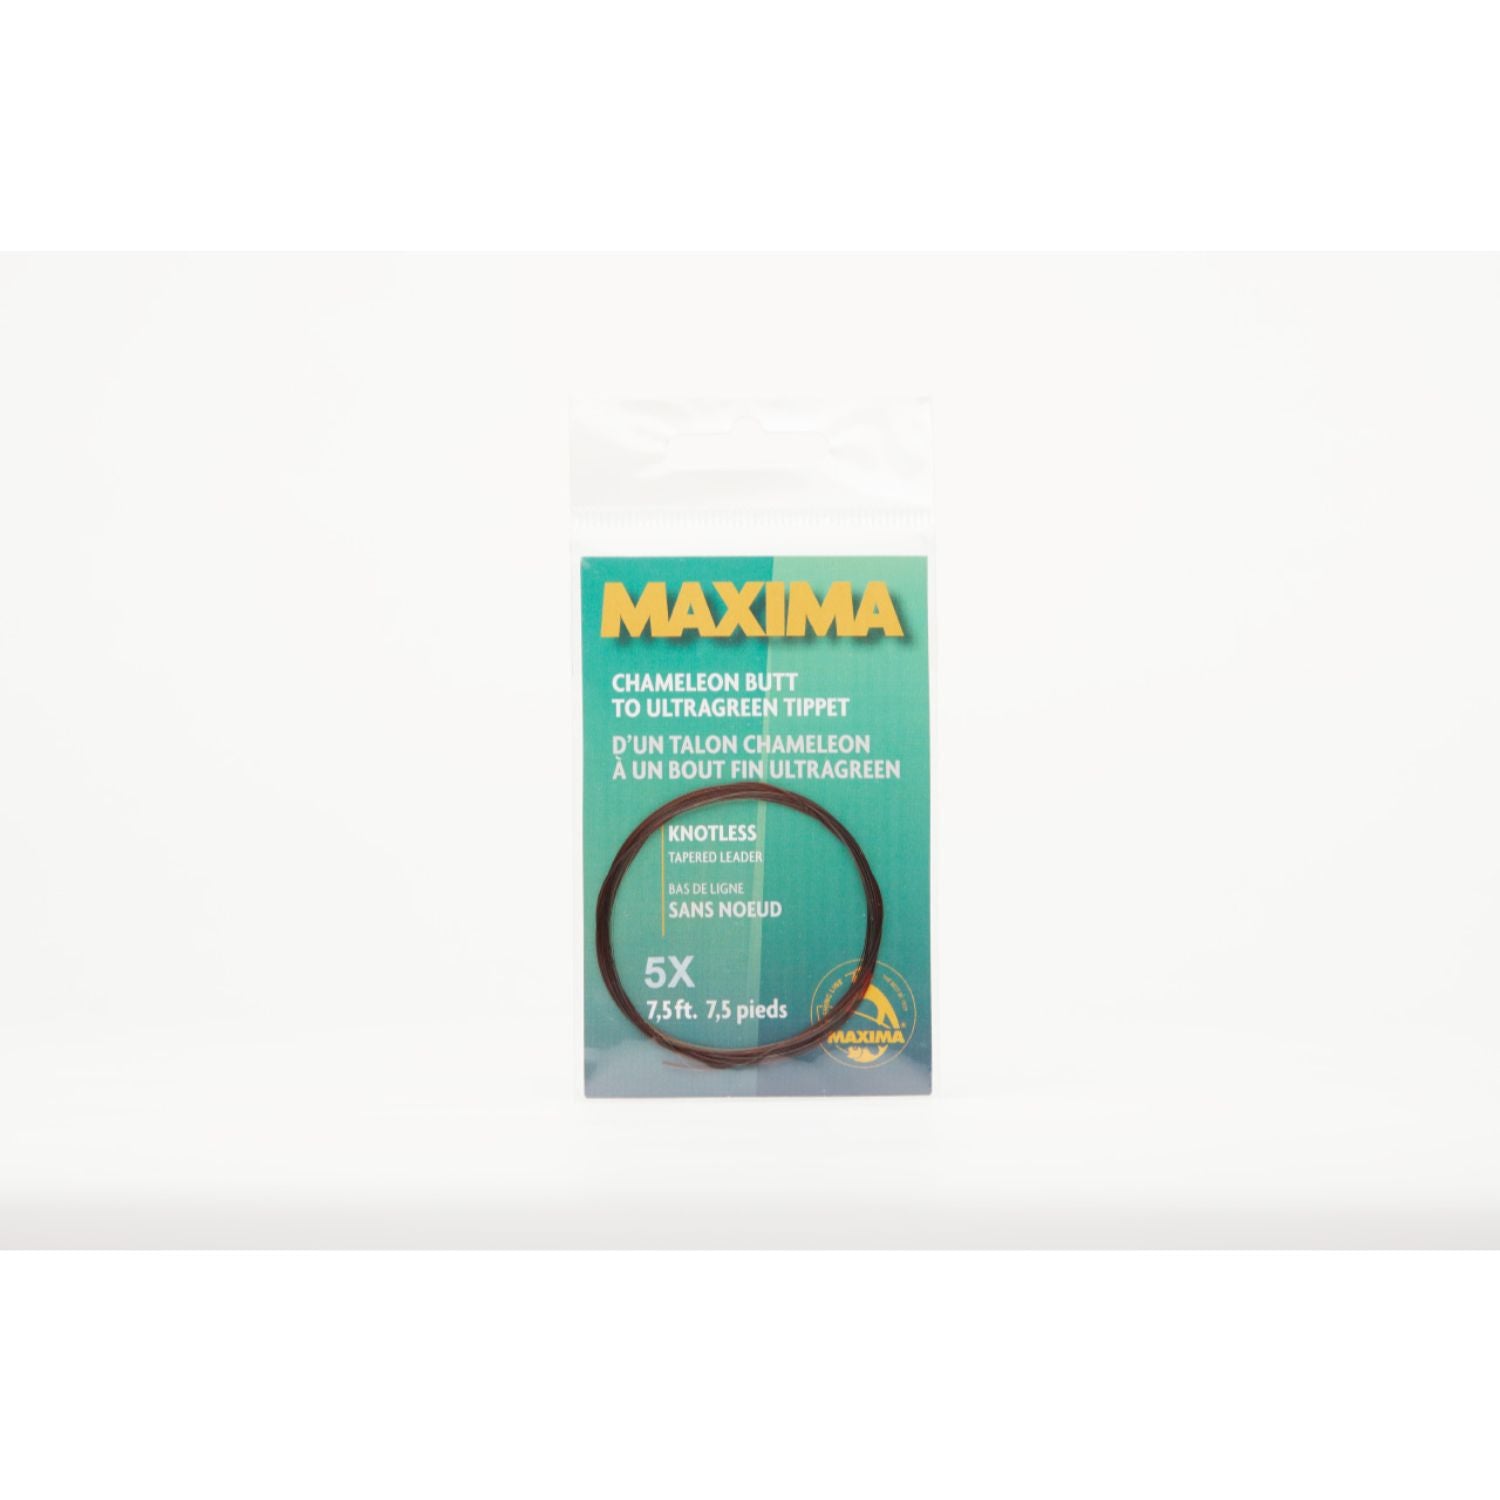 Maxima Knotless Tapered Leader 5x 7.5 ft Clear – The Infidel Co